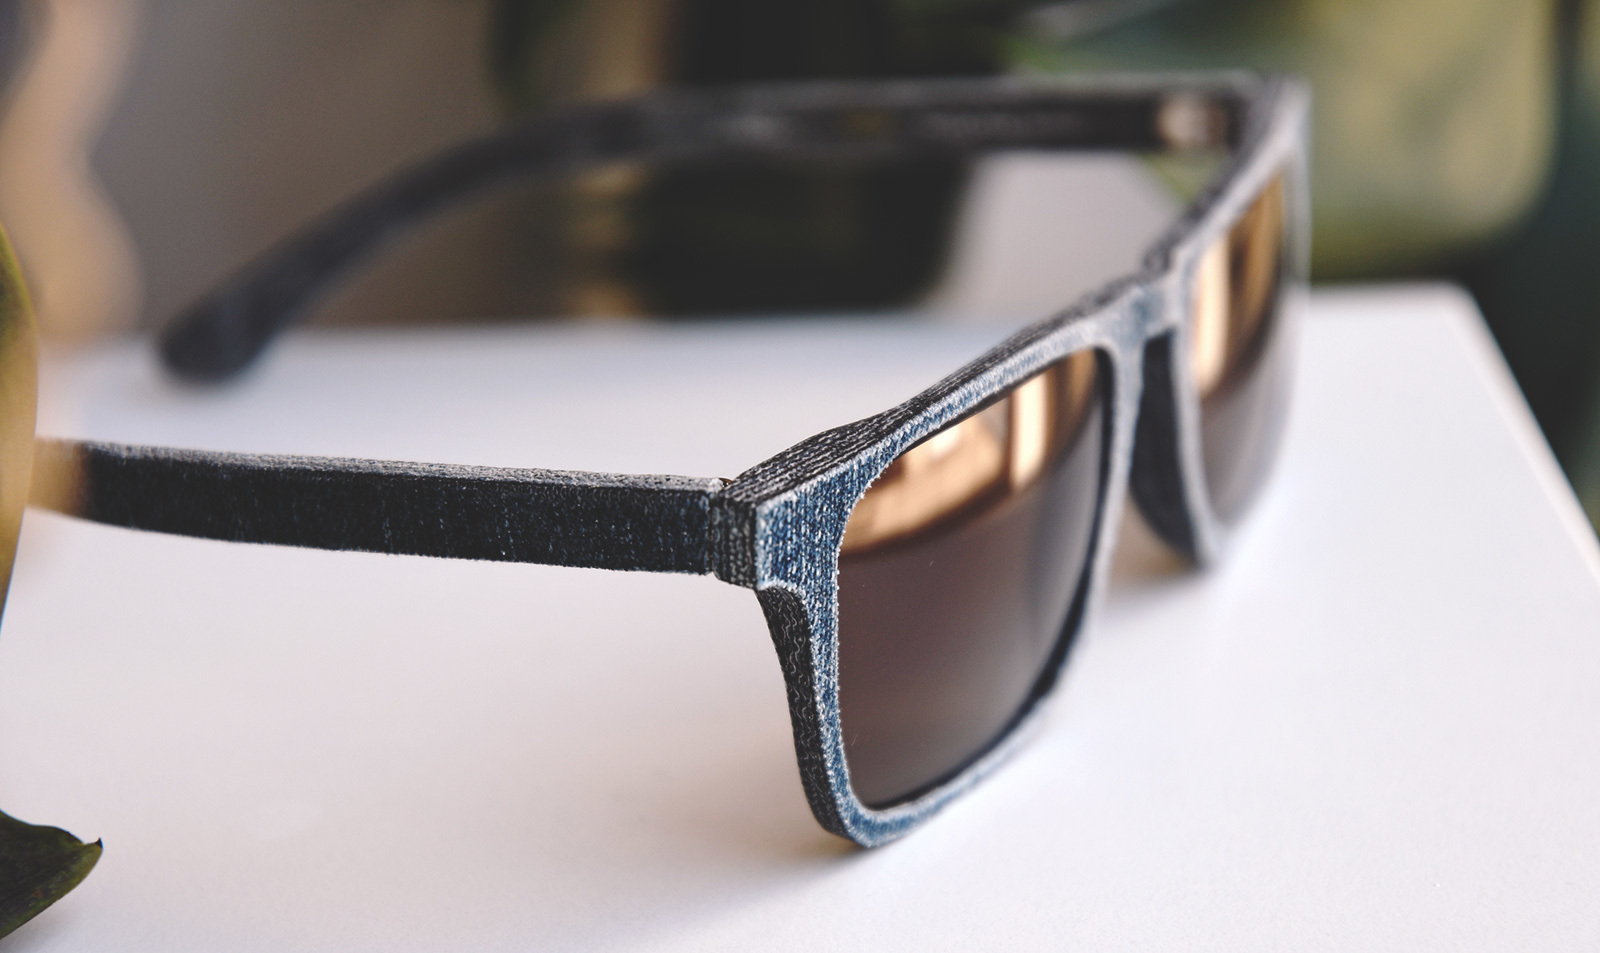 Large_mosevic-recycled_jeans-sunglasses-zeiss